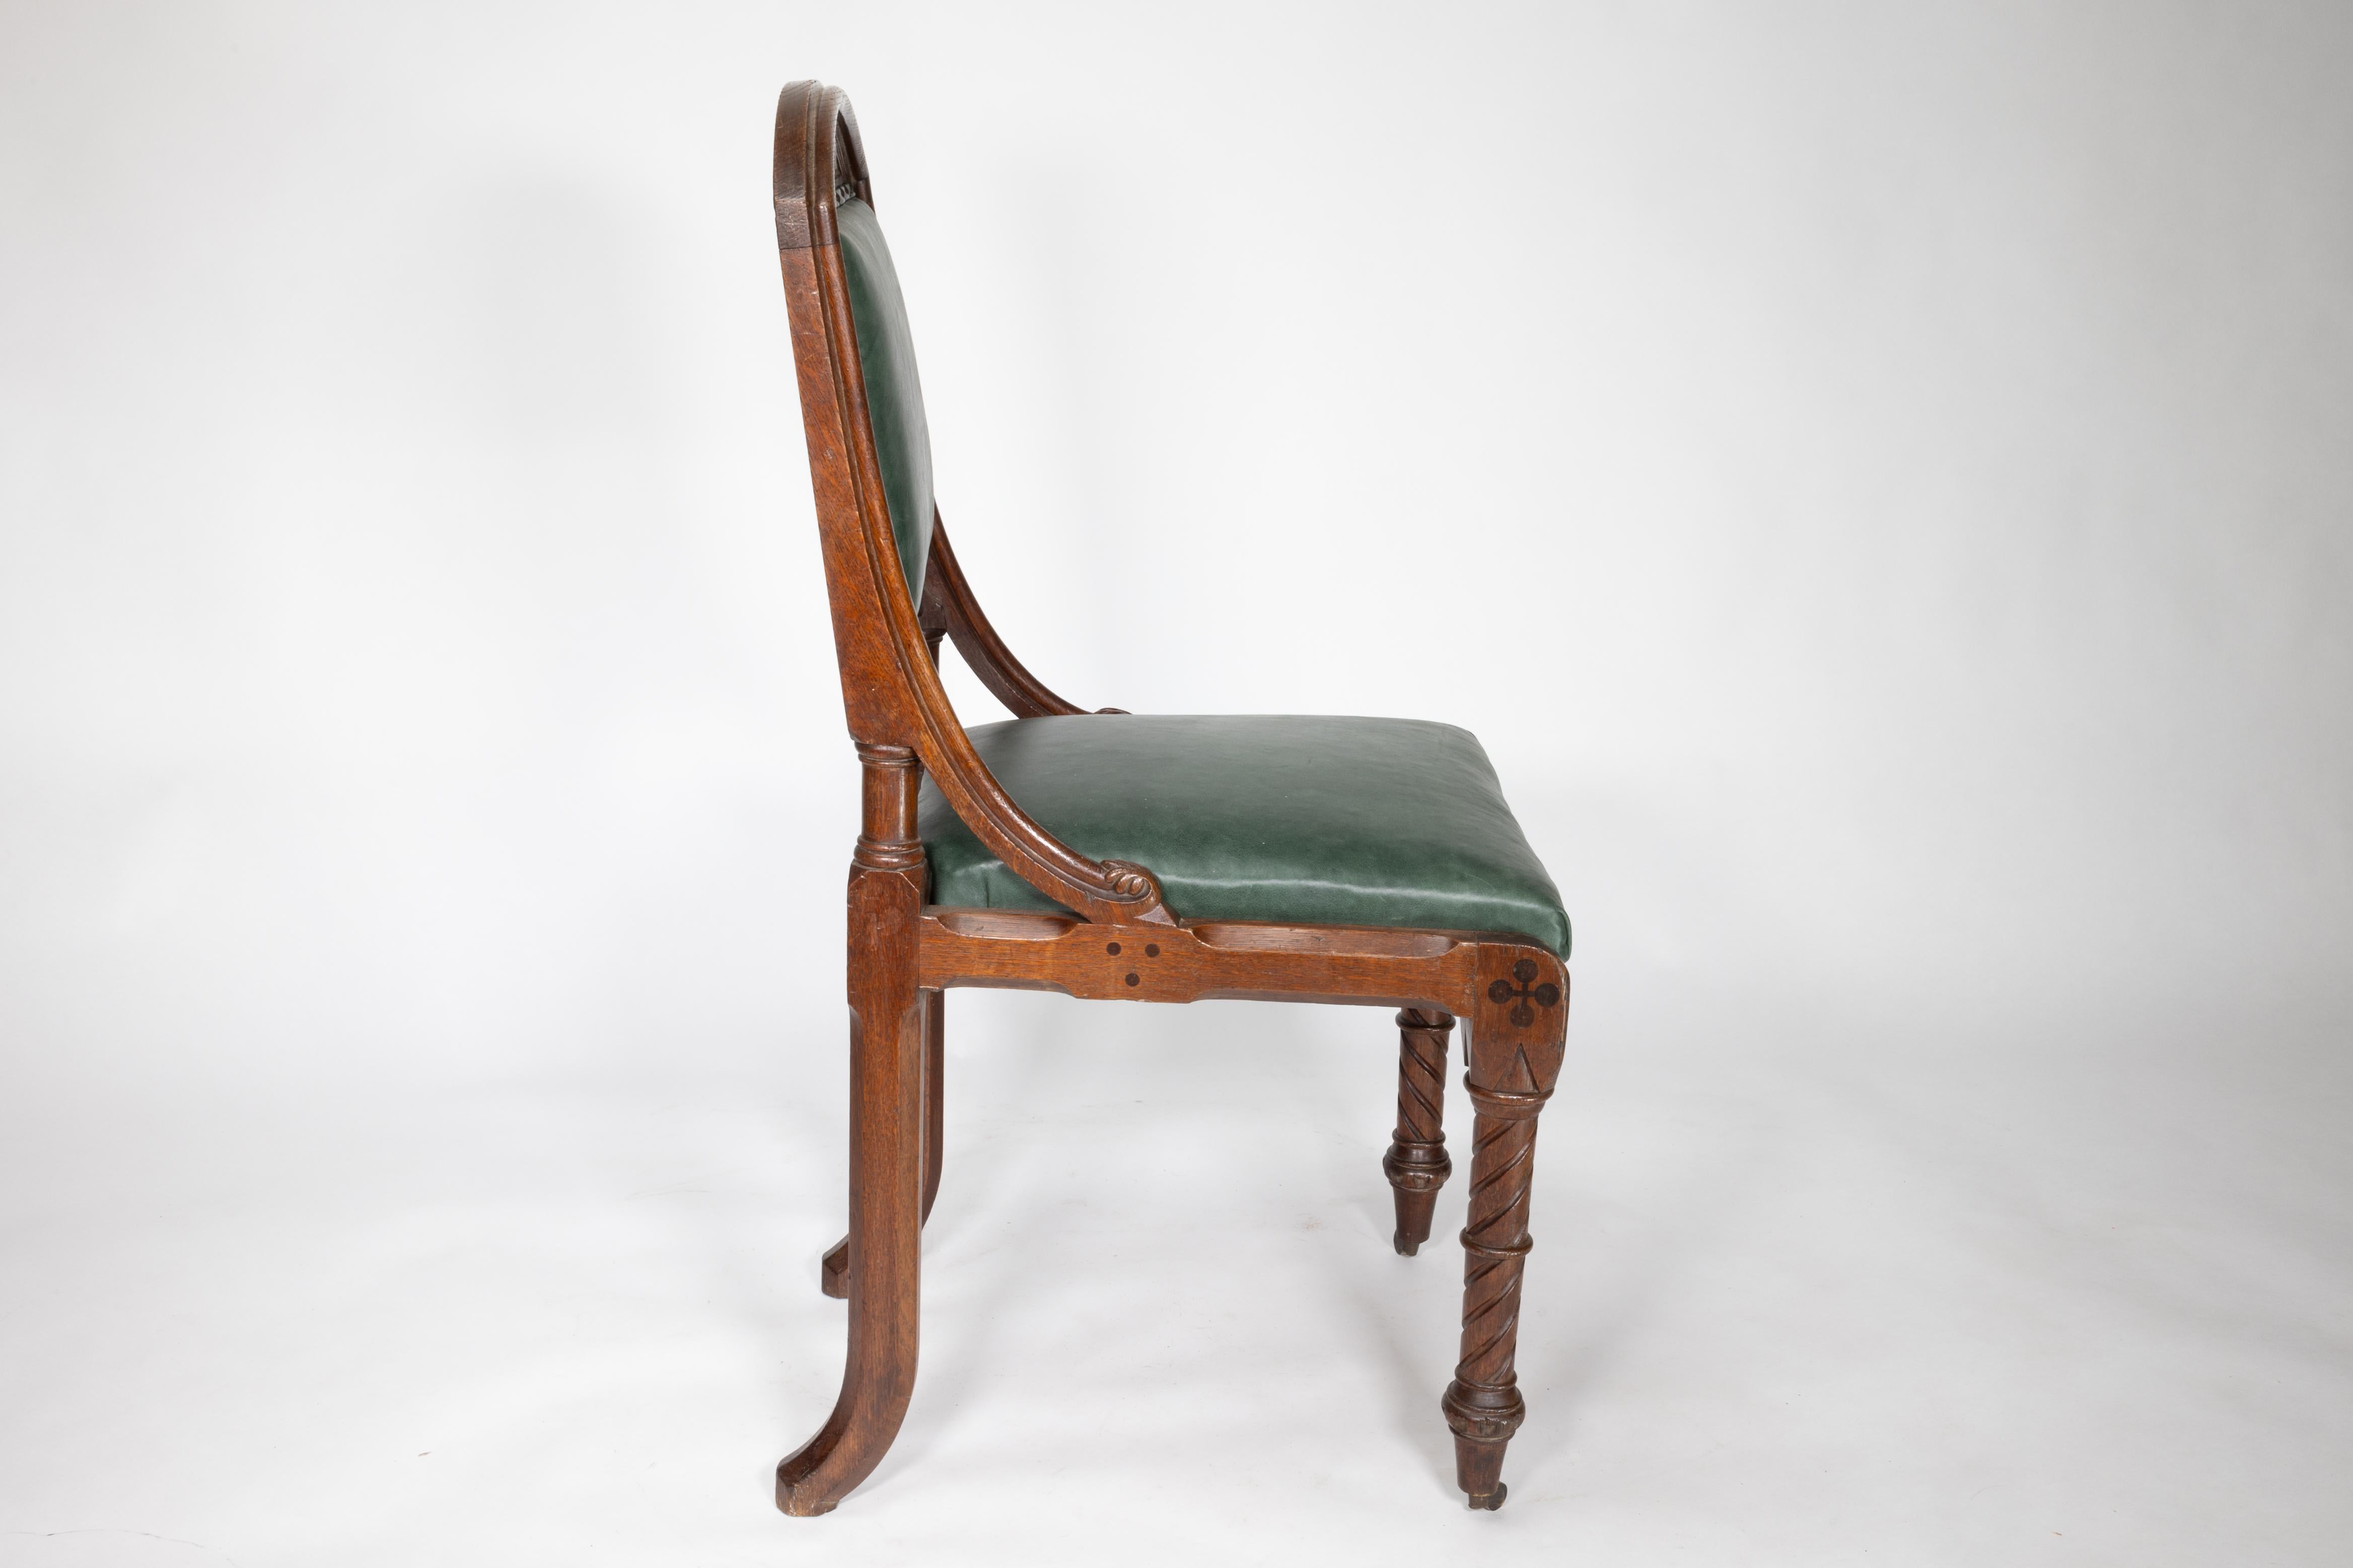 John Pollard Seddon (attributed). A good Gothic Revival oak side or desk chair of superior quality with carved ripple scroll details to the head rest and curved side supports joining to the seat sides with carved knops to the end, the front legs